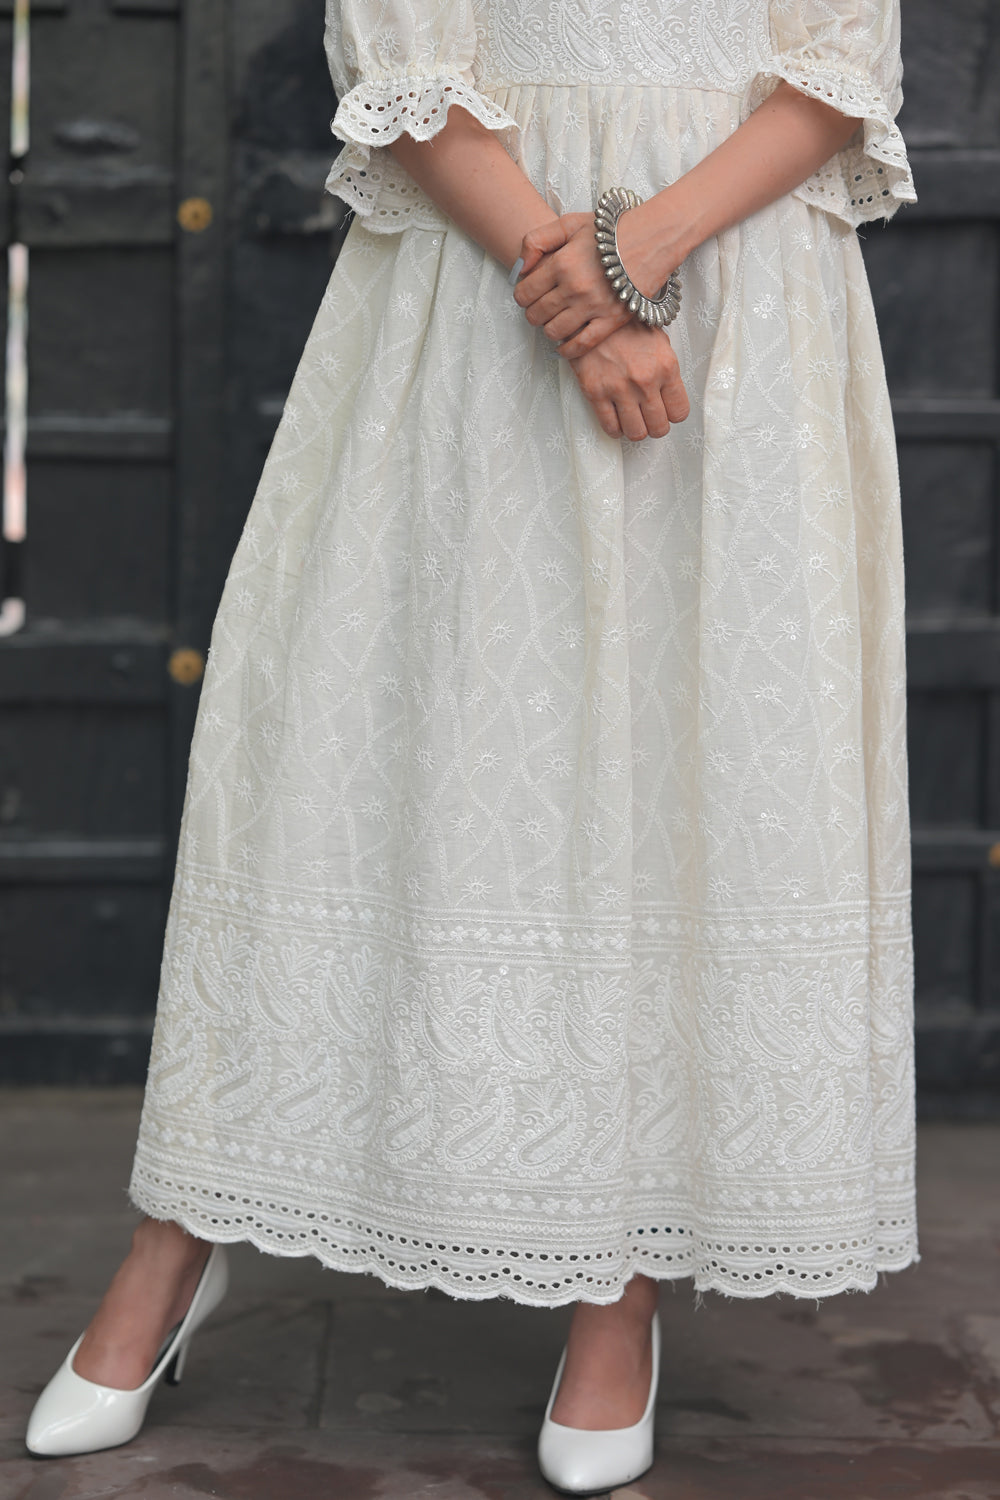 Sea Shell Chikankari Style Dress with Puff Sleeves and Eyelet Border | Made To Order